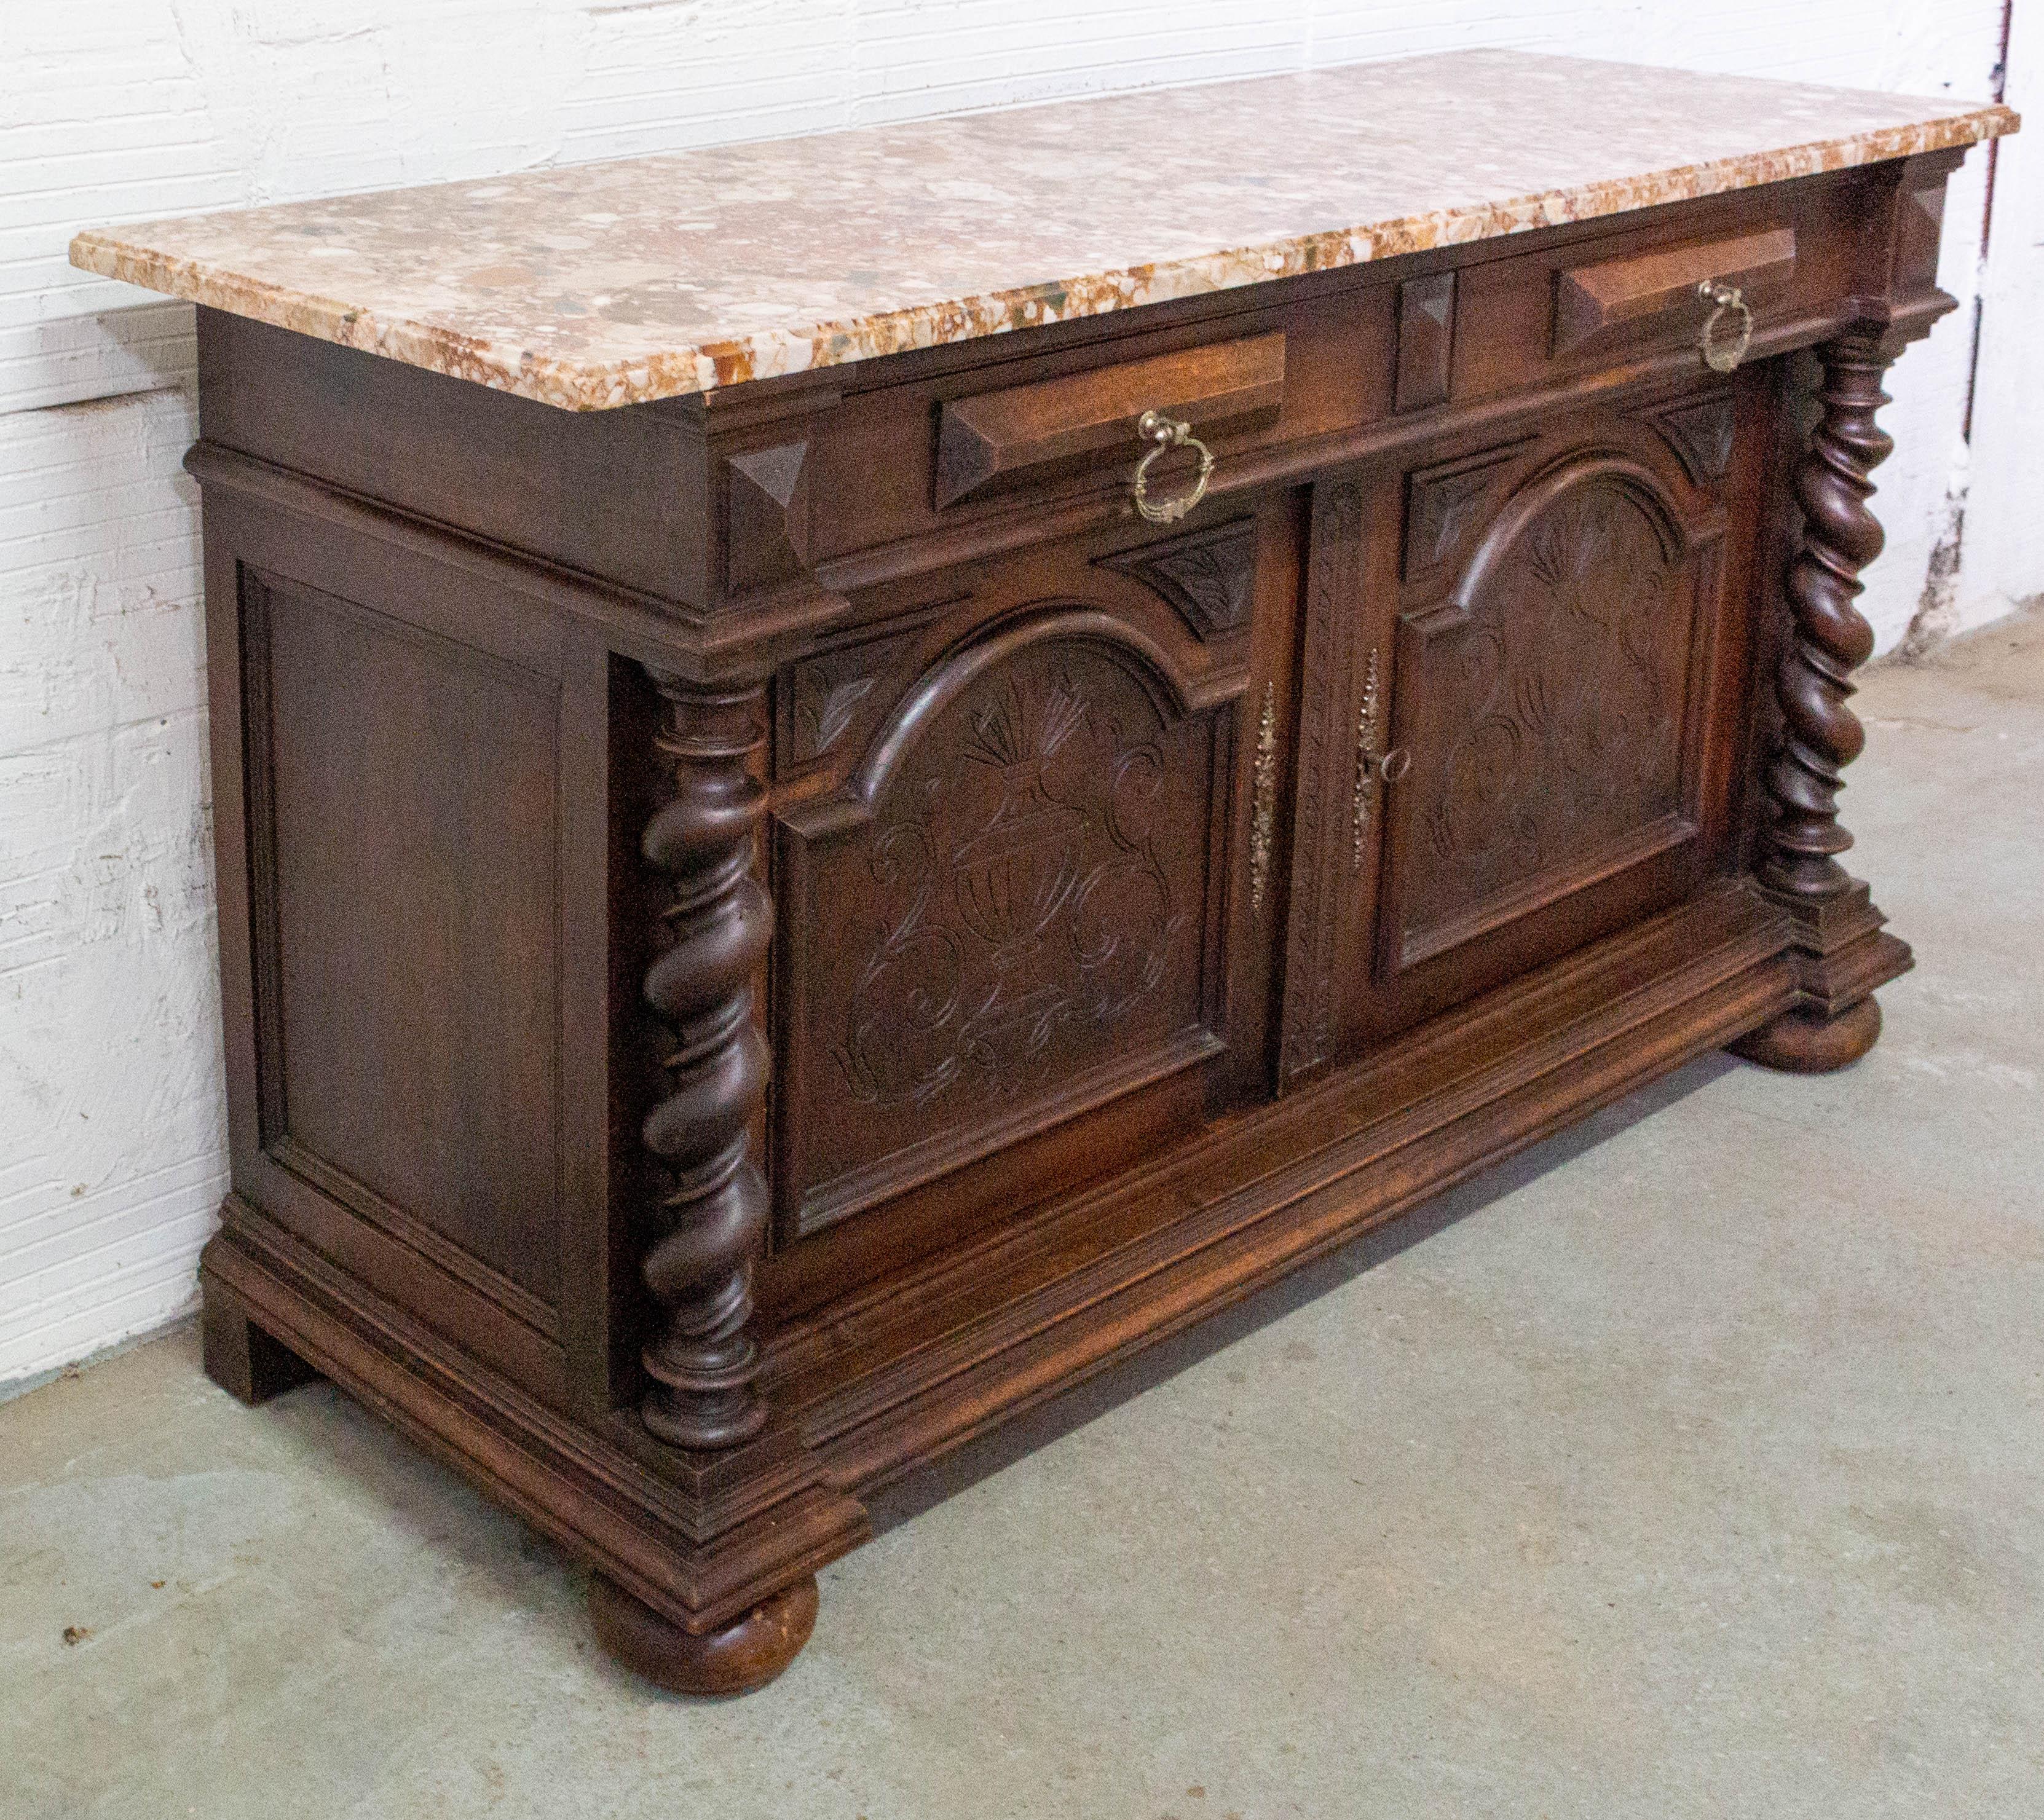 Late 19th century sideboard French credenza buffet
Louis XIII Style turned columns and marble top
In very good condition 

Shipping:
P 46/134/H 74.5 cm 74 kg.